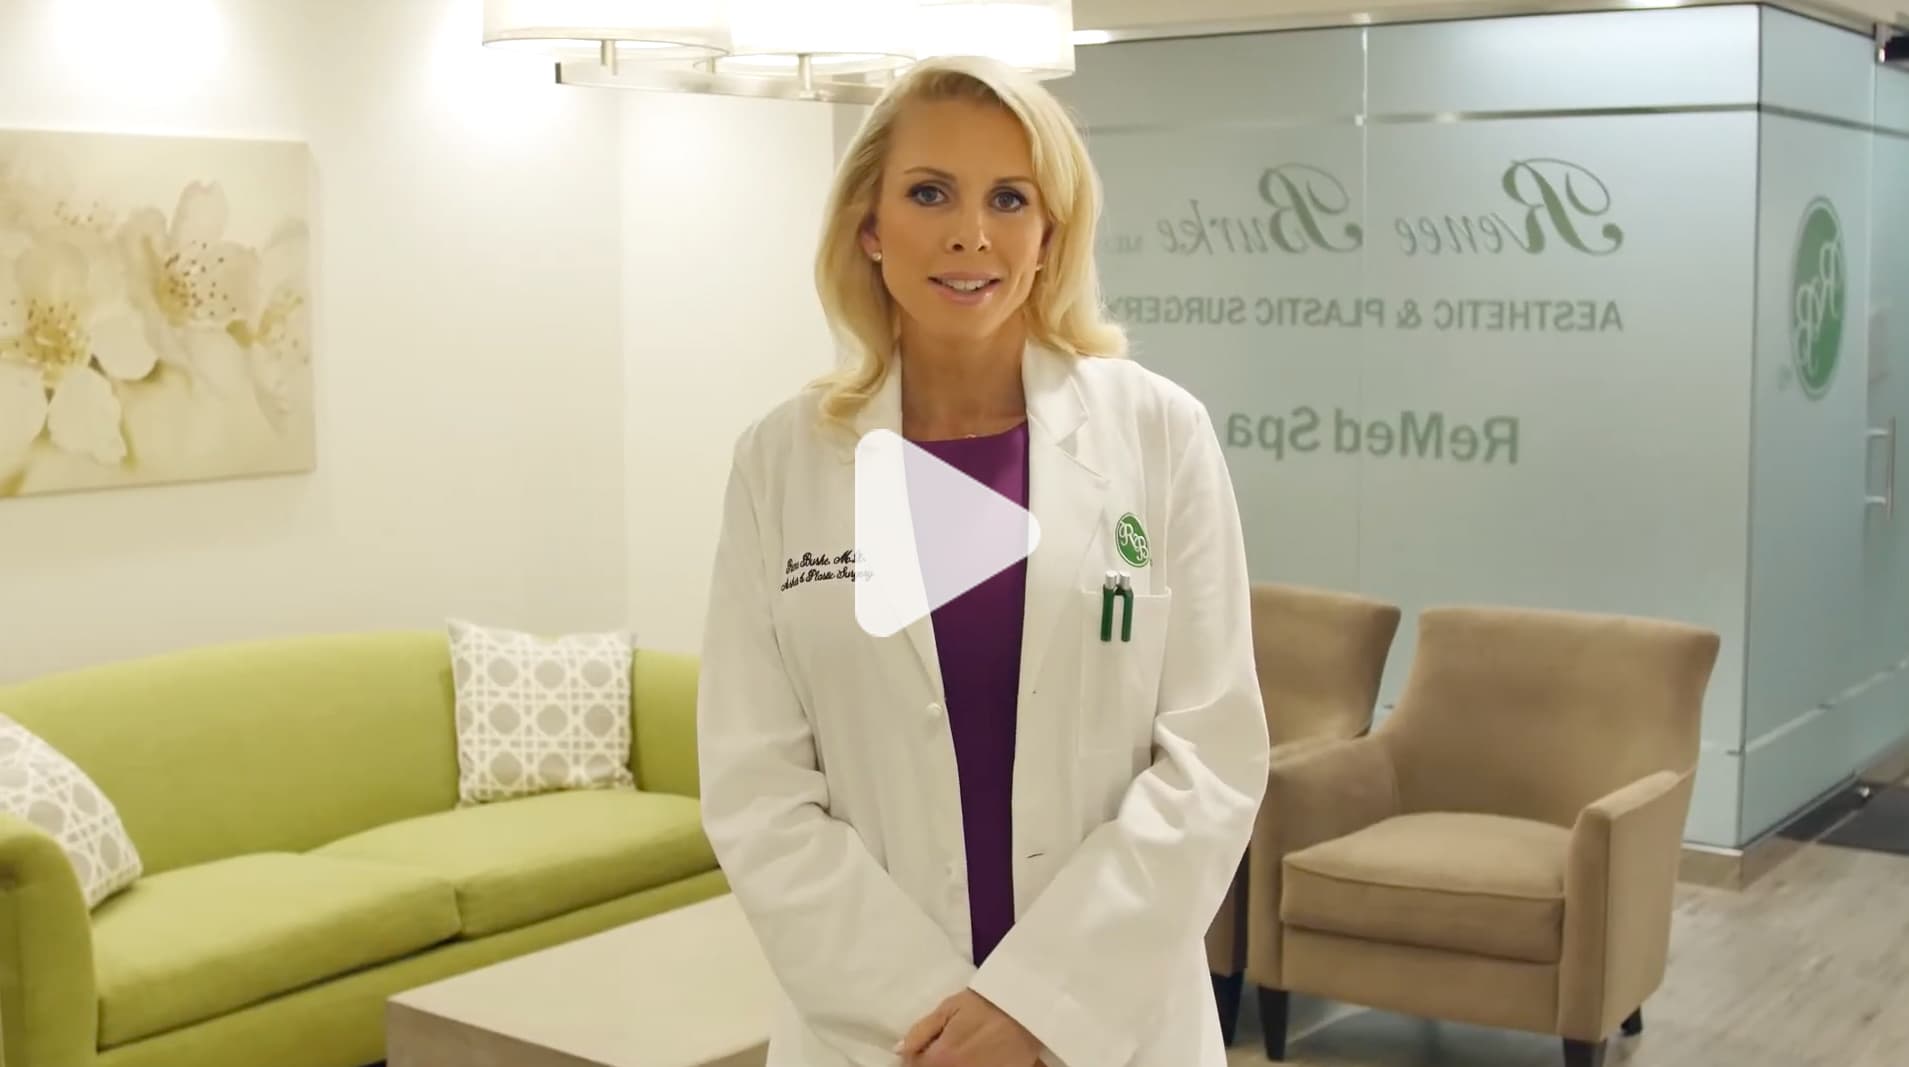 Video Introduction for Dr. Renee M. Burke